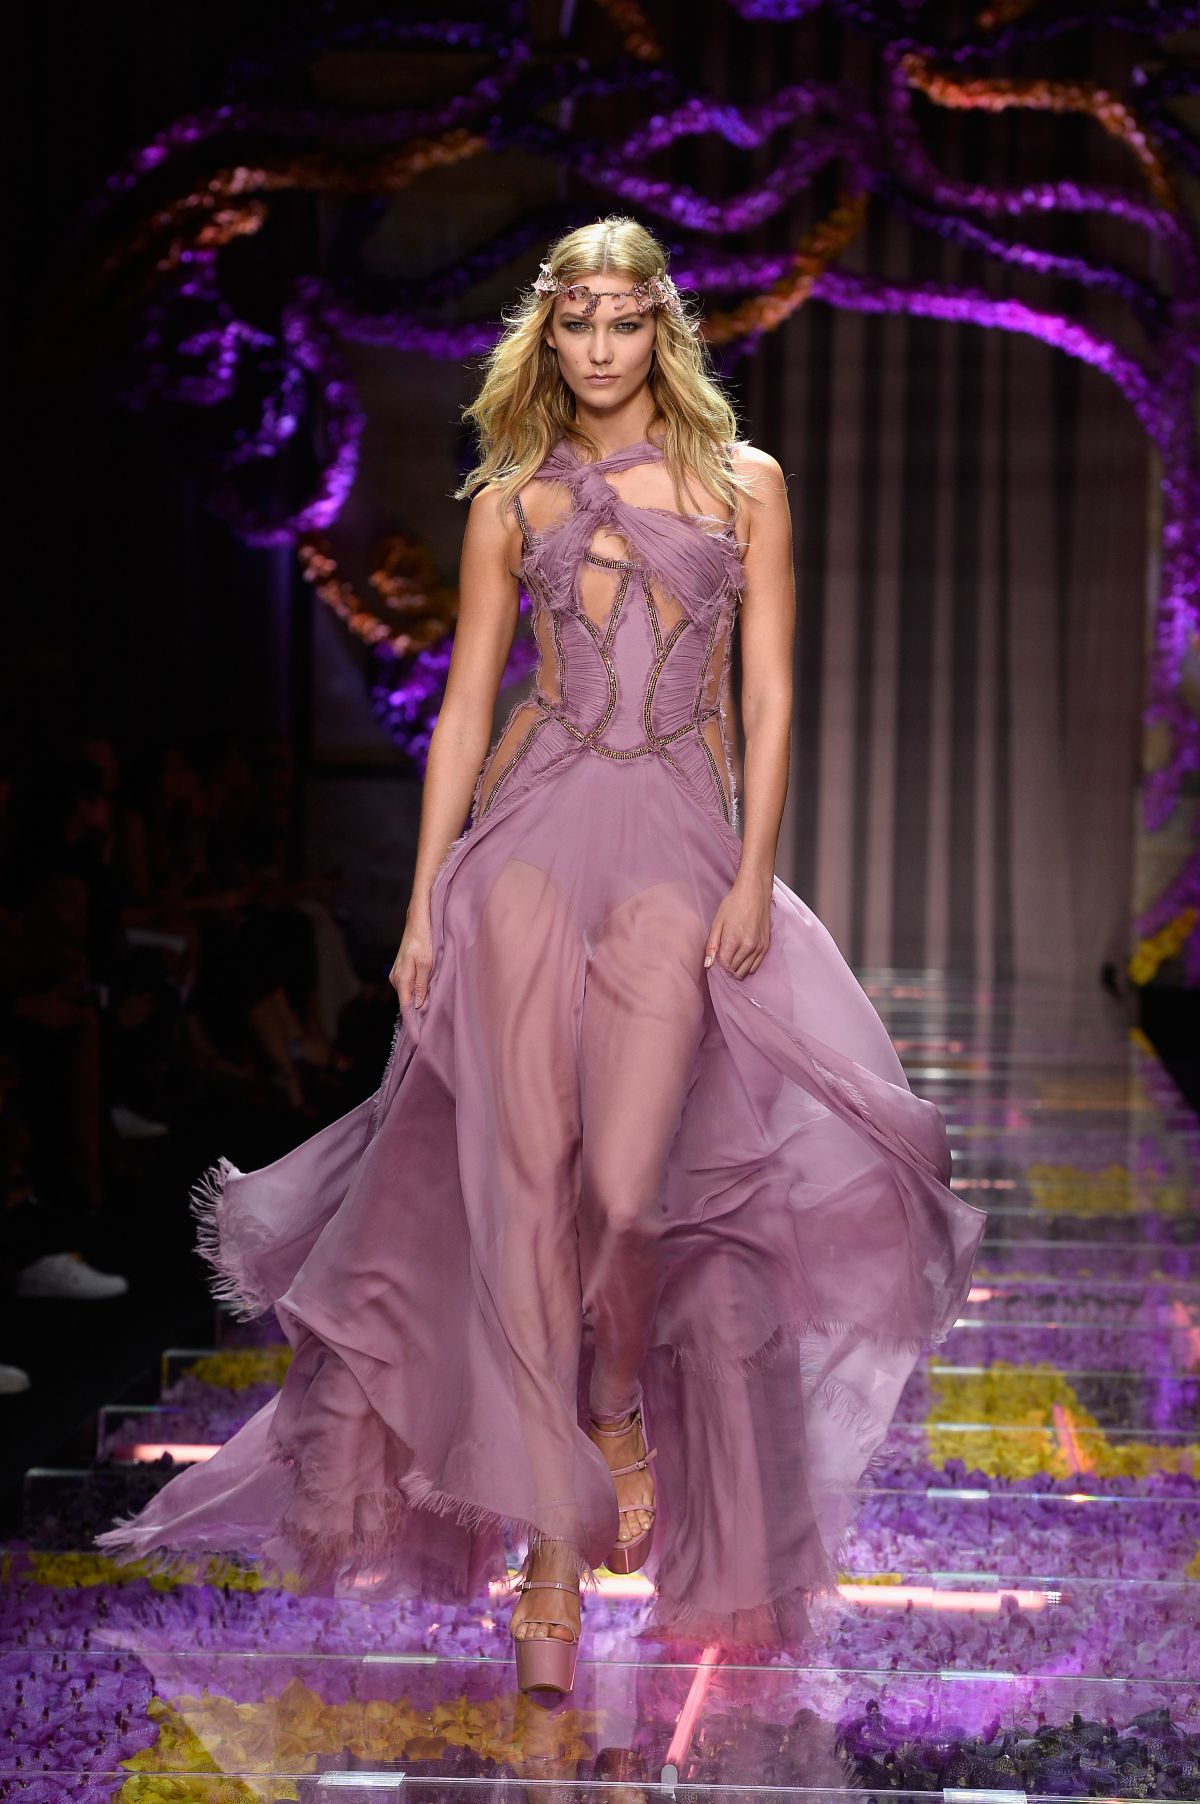 KARLIE KLOSS on the Runway of Atelier Versace Fashion Show in Paris – HawtCelebs